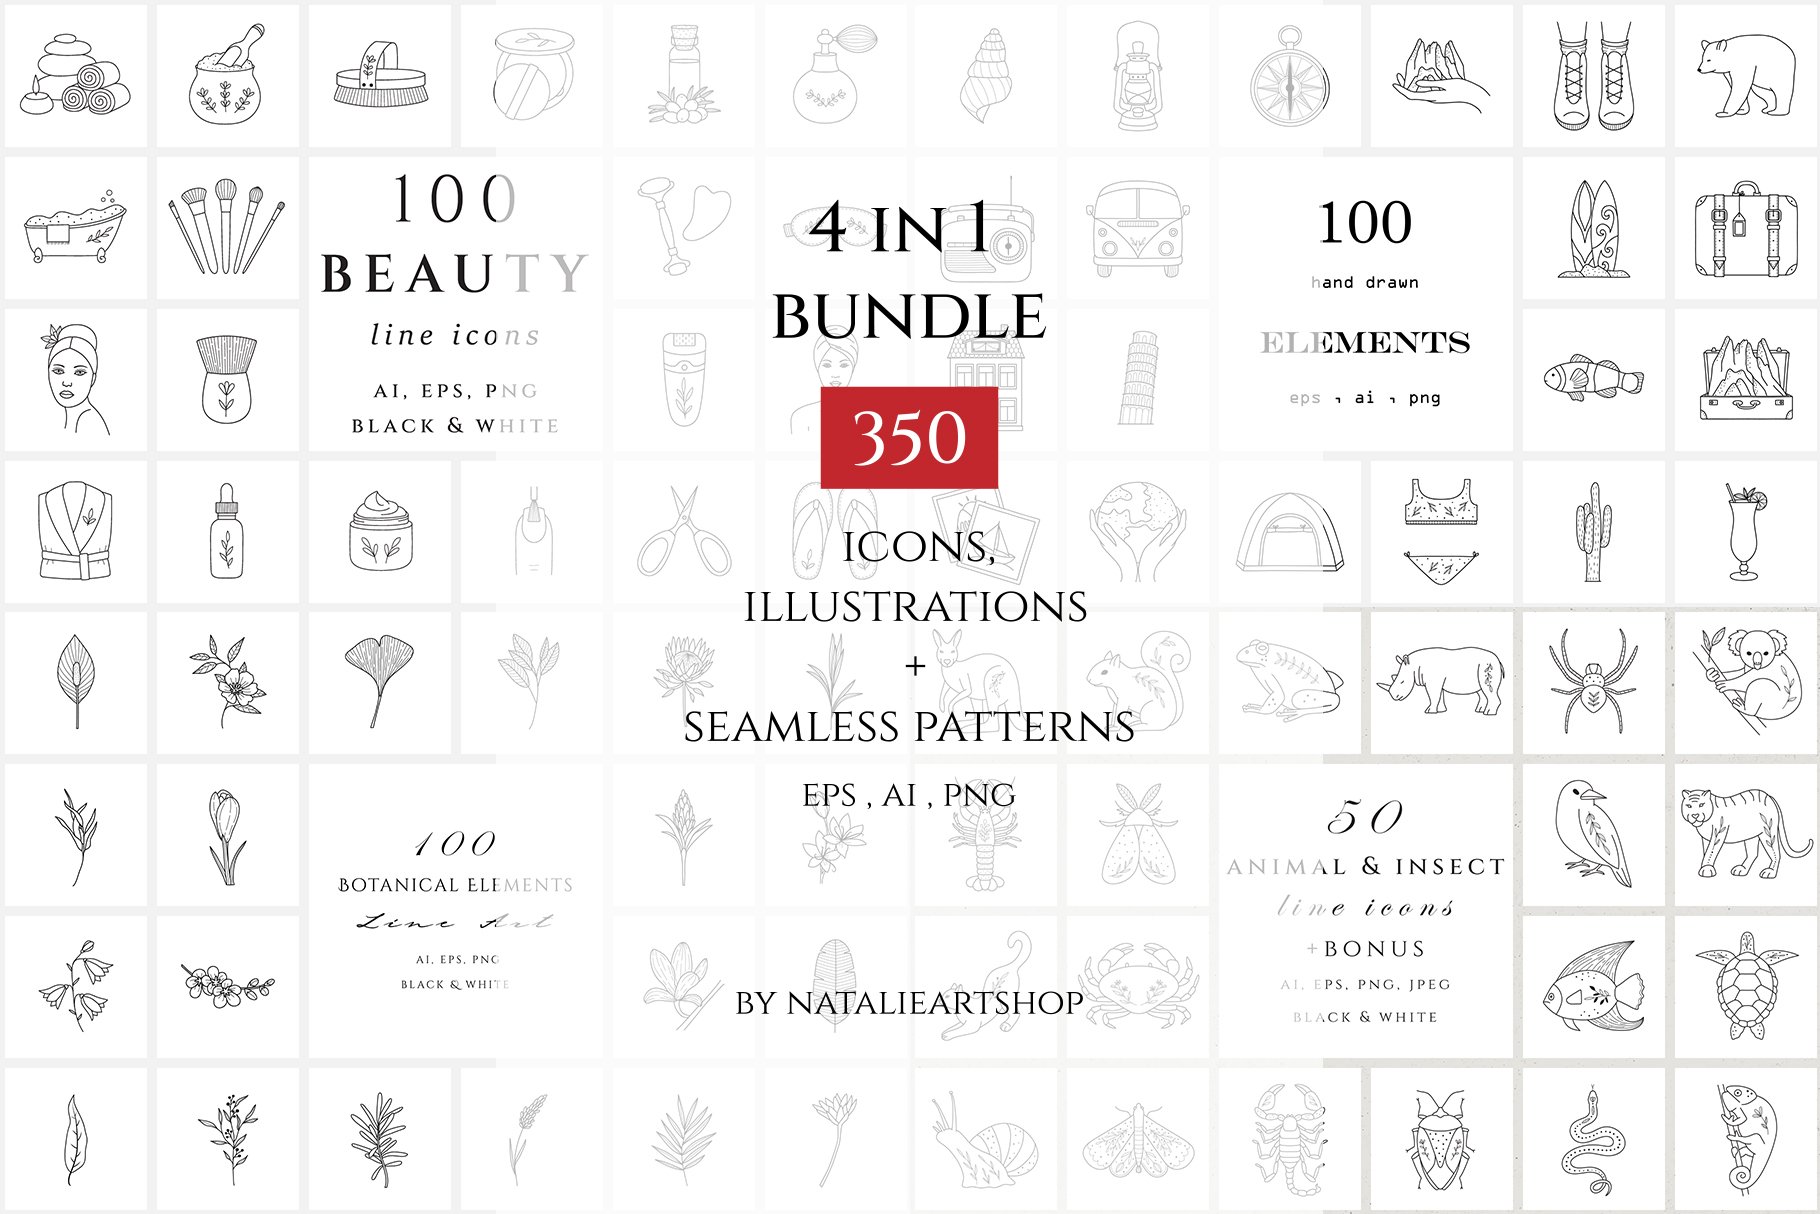 Icons & Illustrations Bundle cover image.